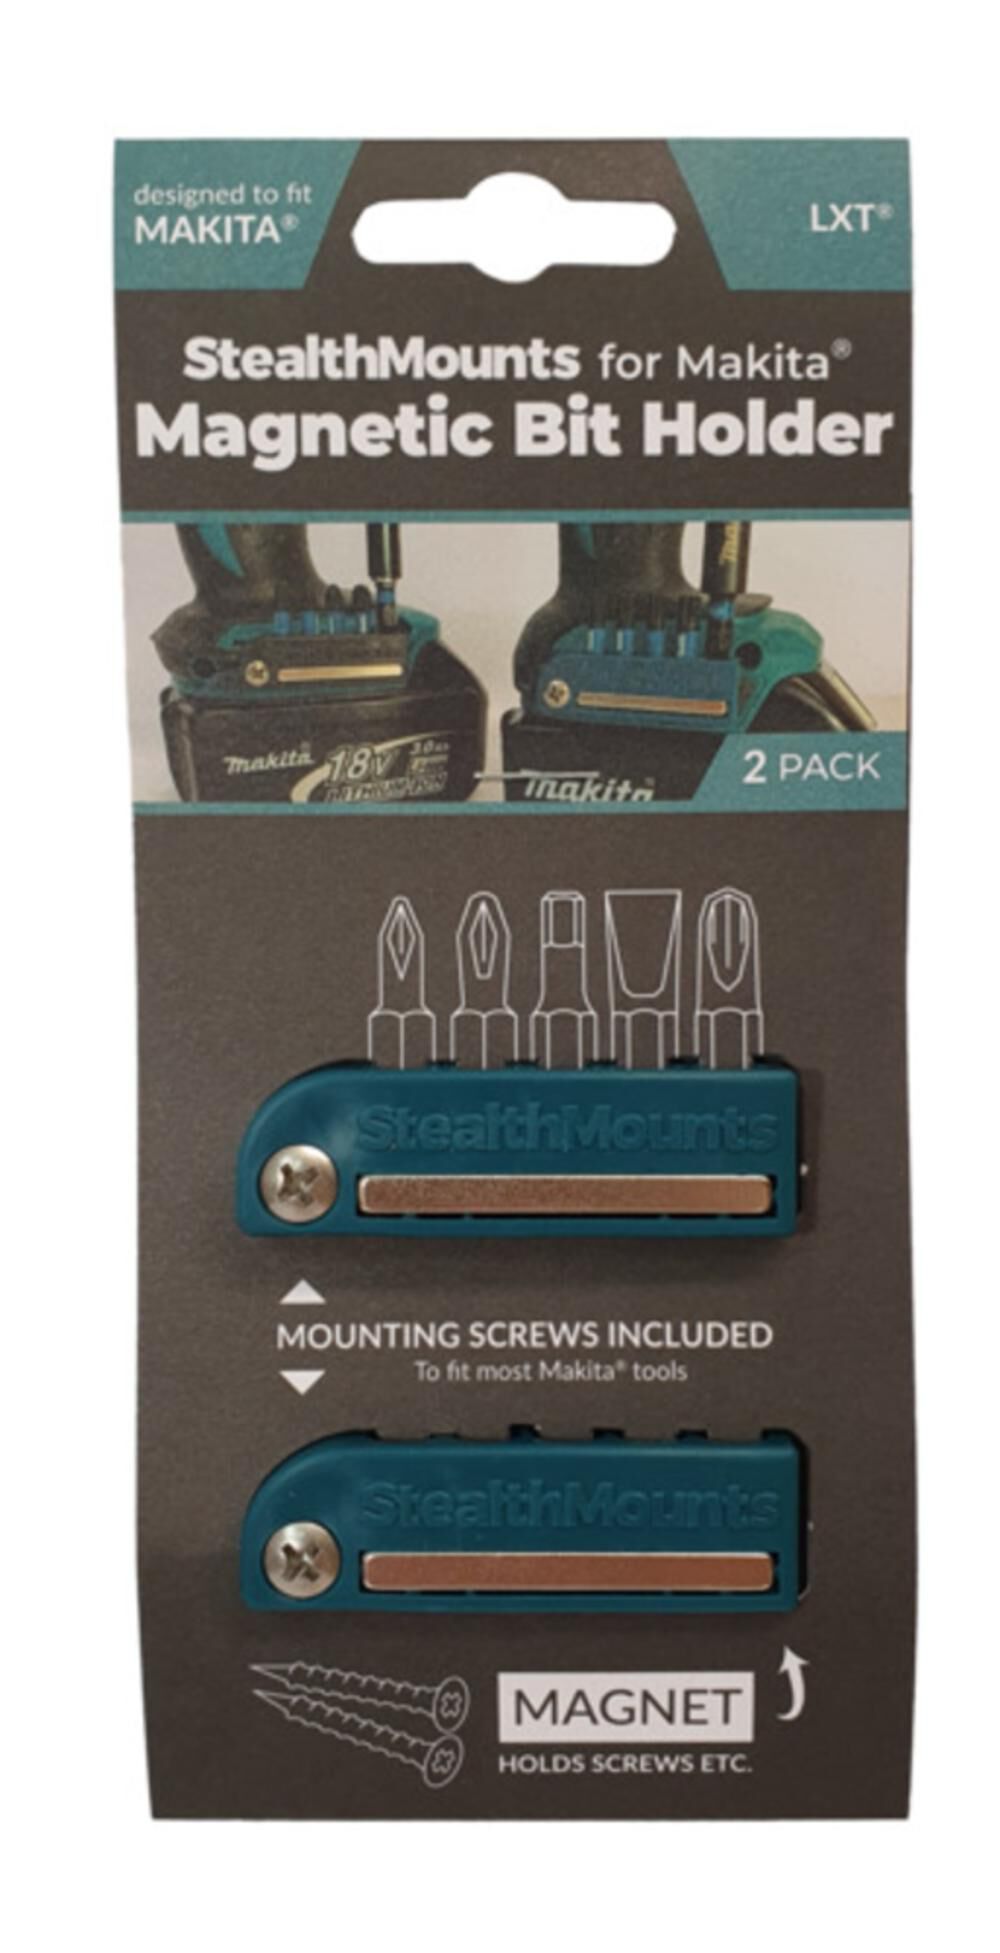 StealthMounts Magnetic Bit Holder for Makita LXT, CXT and XGT Tools